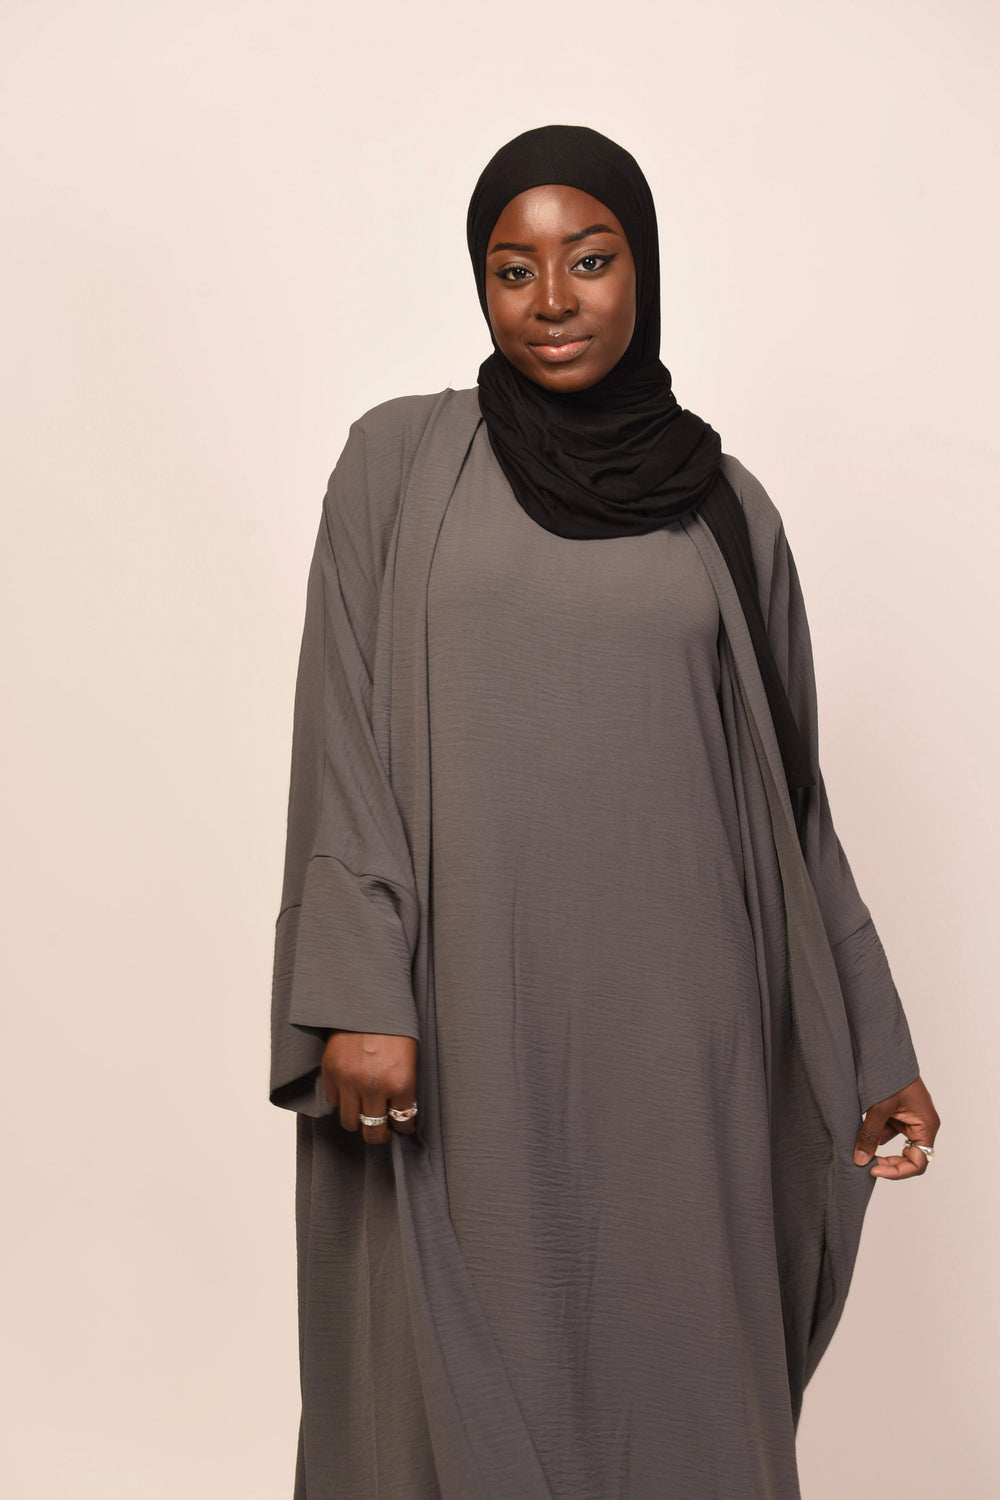 Get trendy with Lea 2-Piece Abaya Set - Gray (As is) -  available at Voilee NY. Grab yours for $54.90 today!